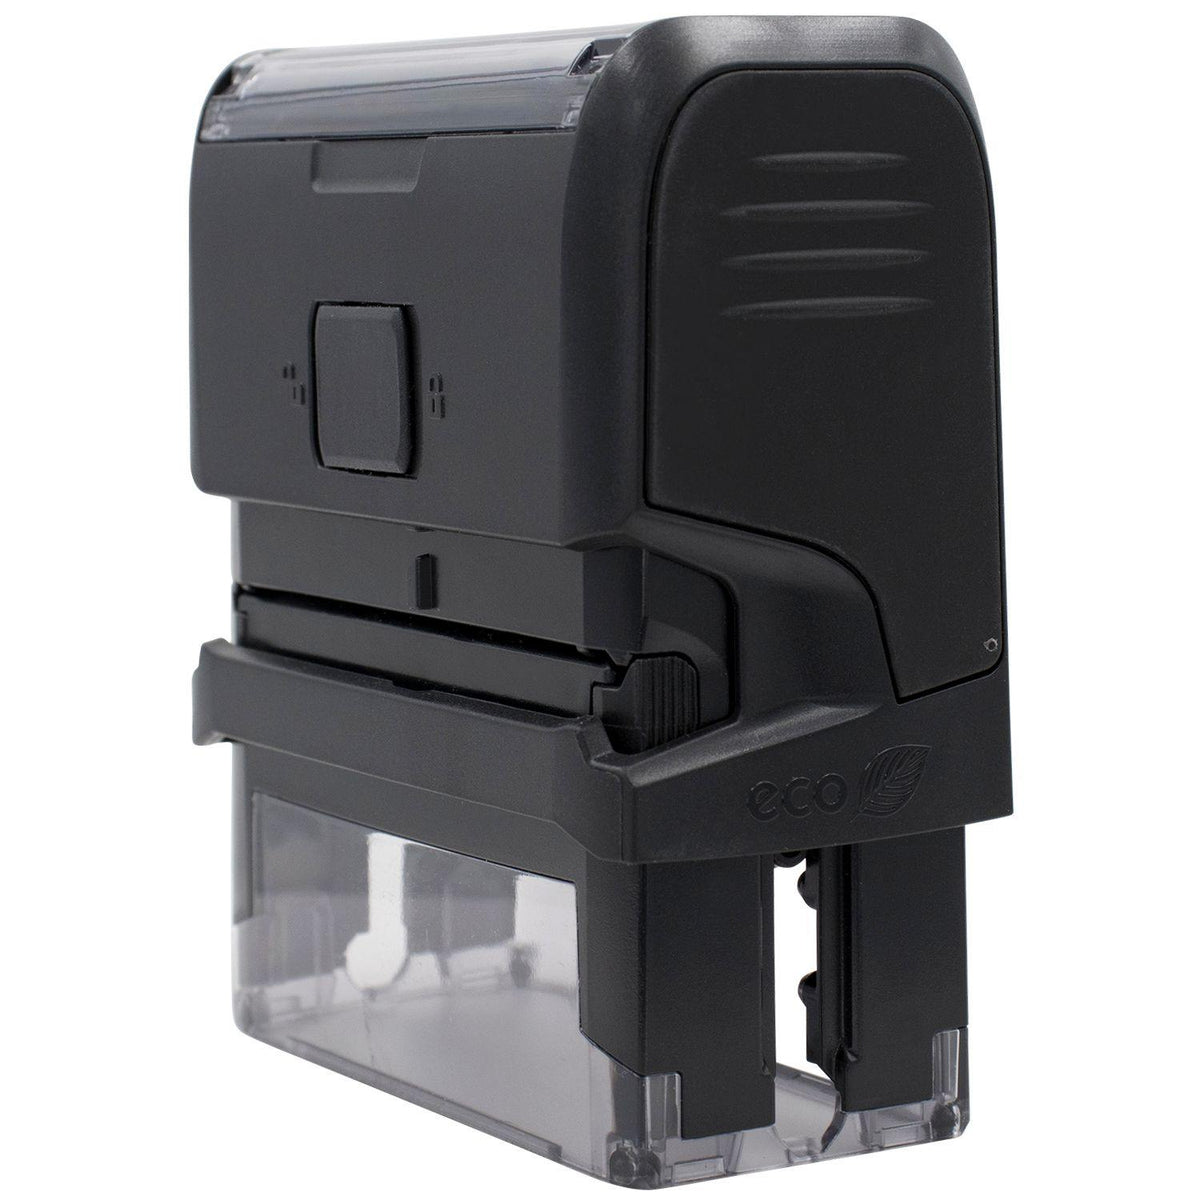 Self-Inking Bravo with Hands Stamp - Engineer Seal Stamps - Brand_Trodat, Impression Size_Small, Stamp Type_Self-Inking Stamp, Type of Use_Teacher